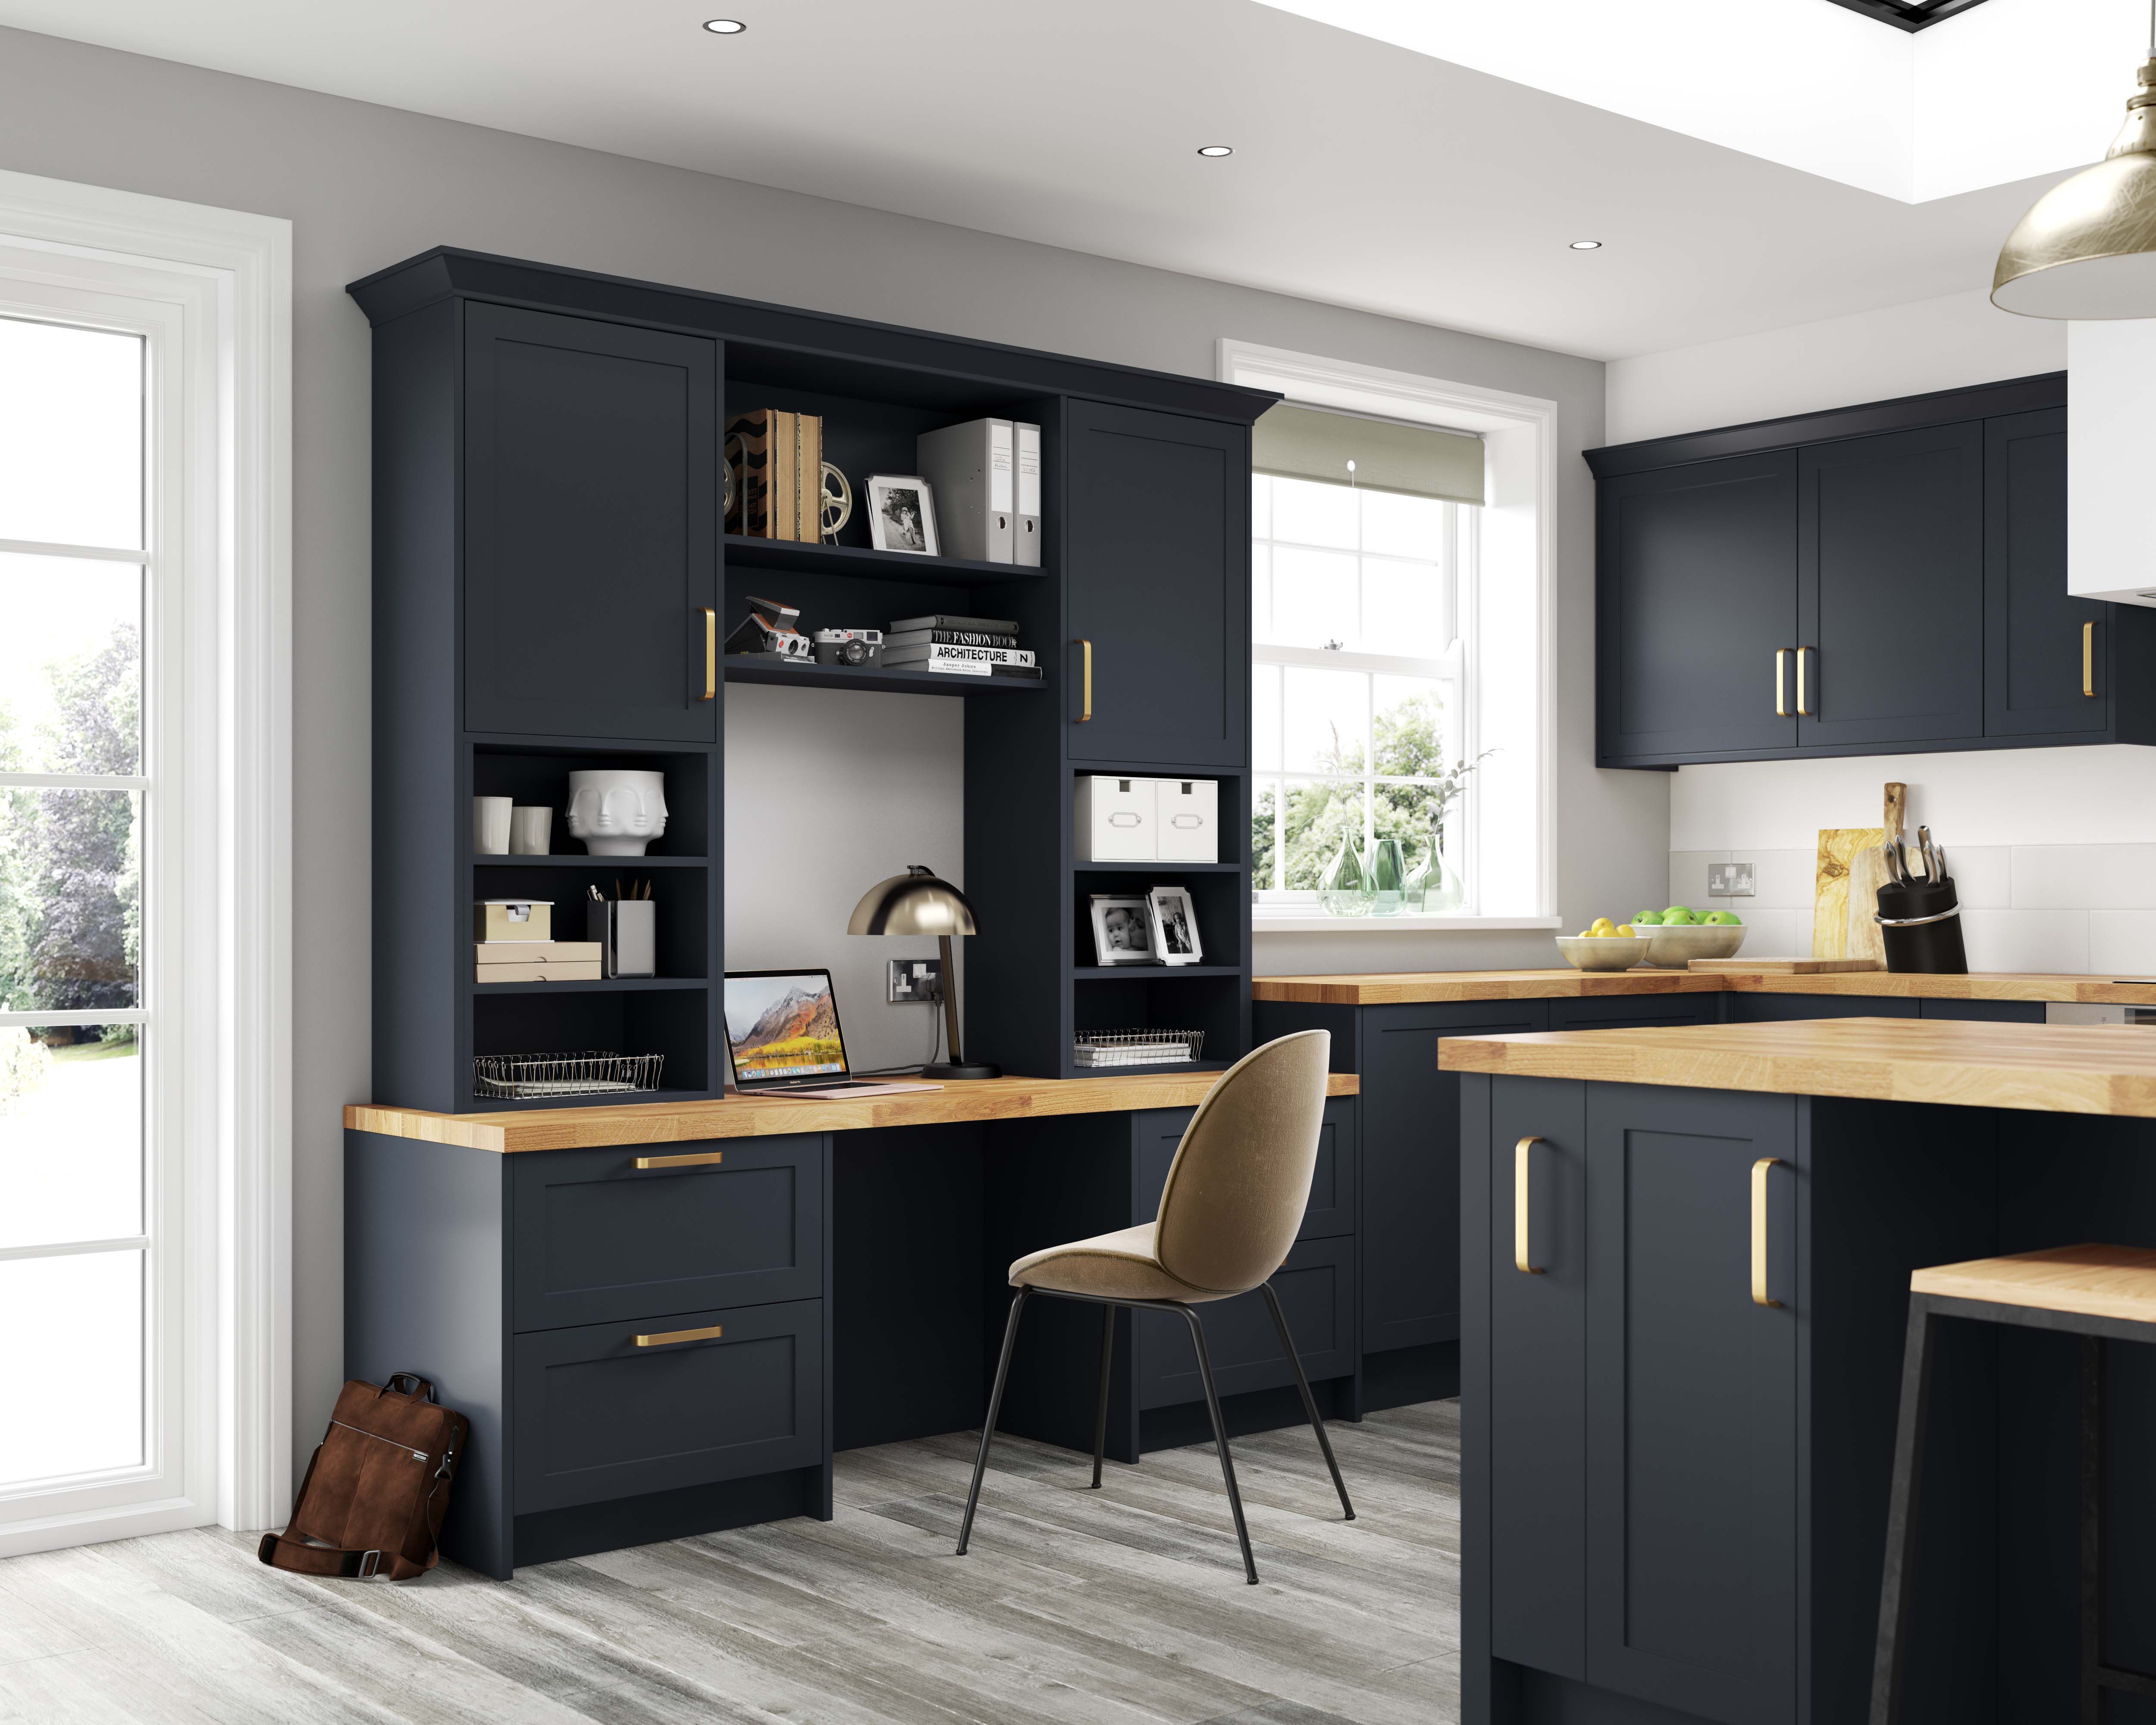 Wickes Launches Fitted Kitchens With Built-in Home Office